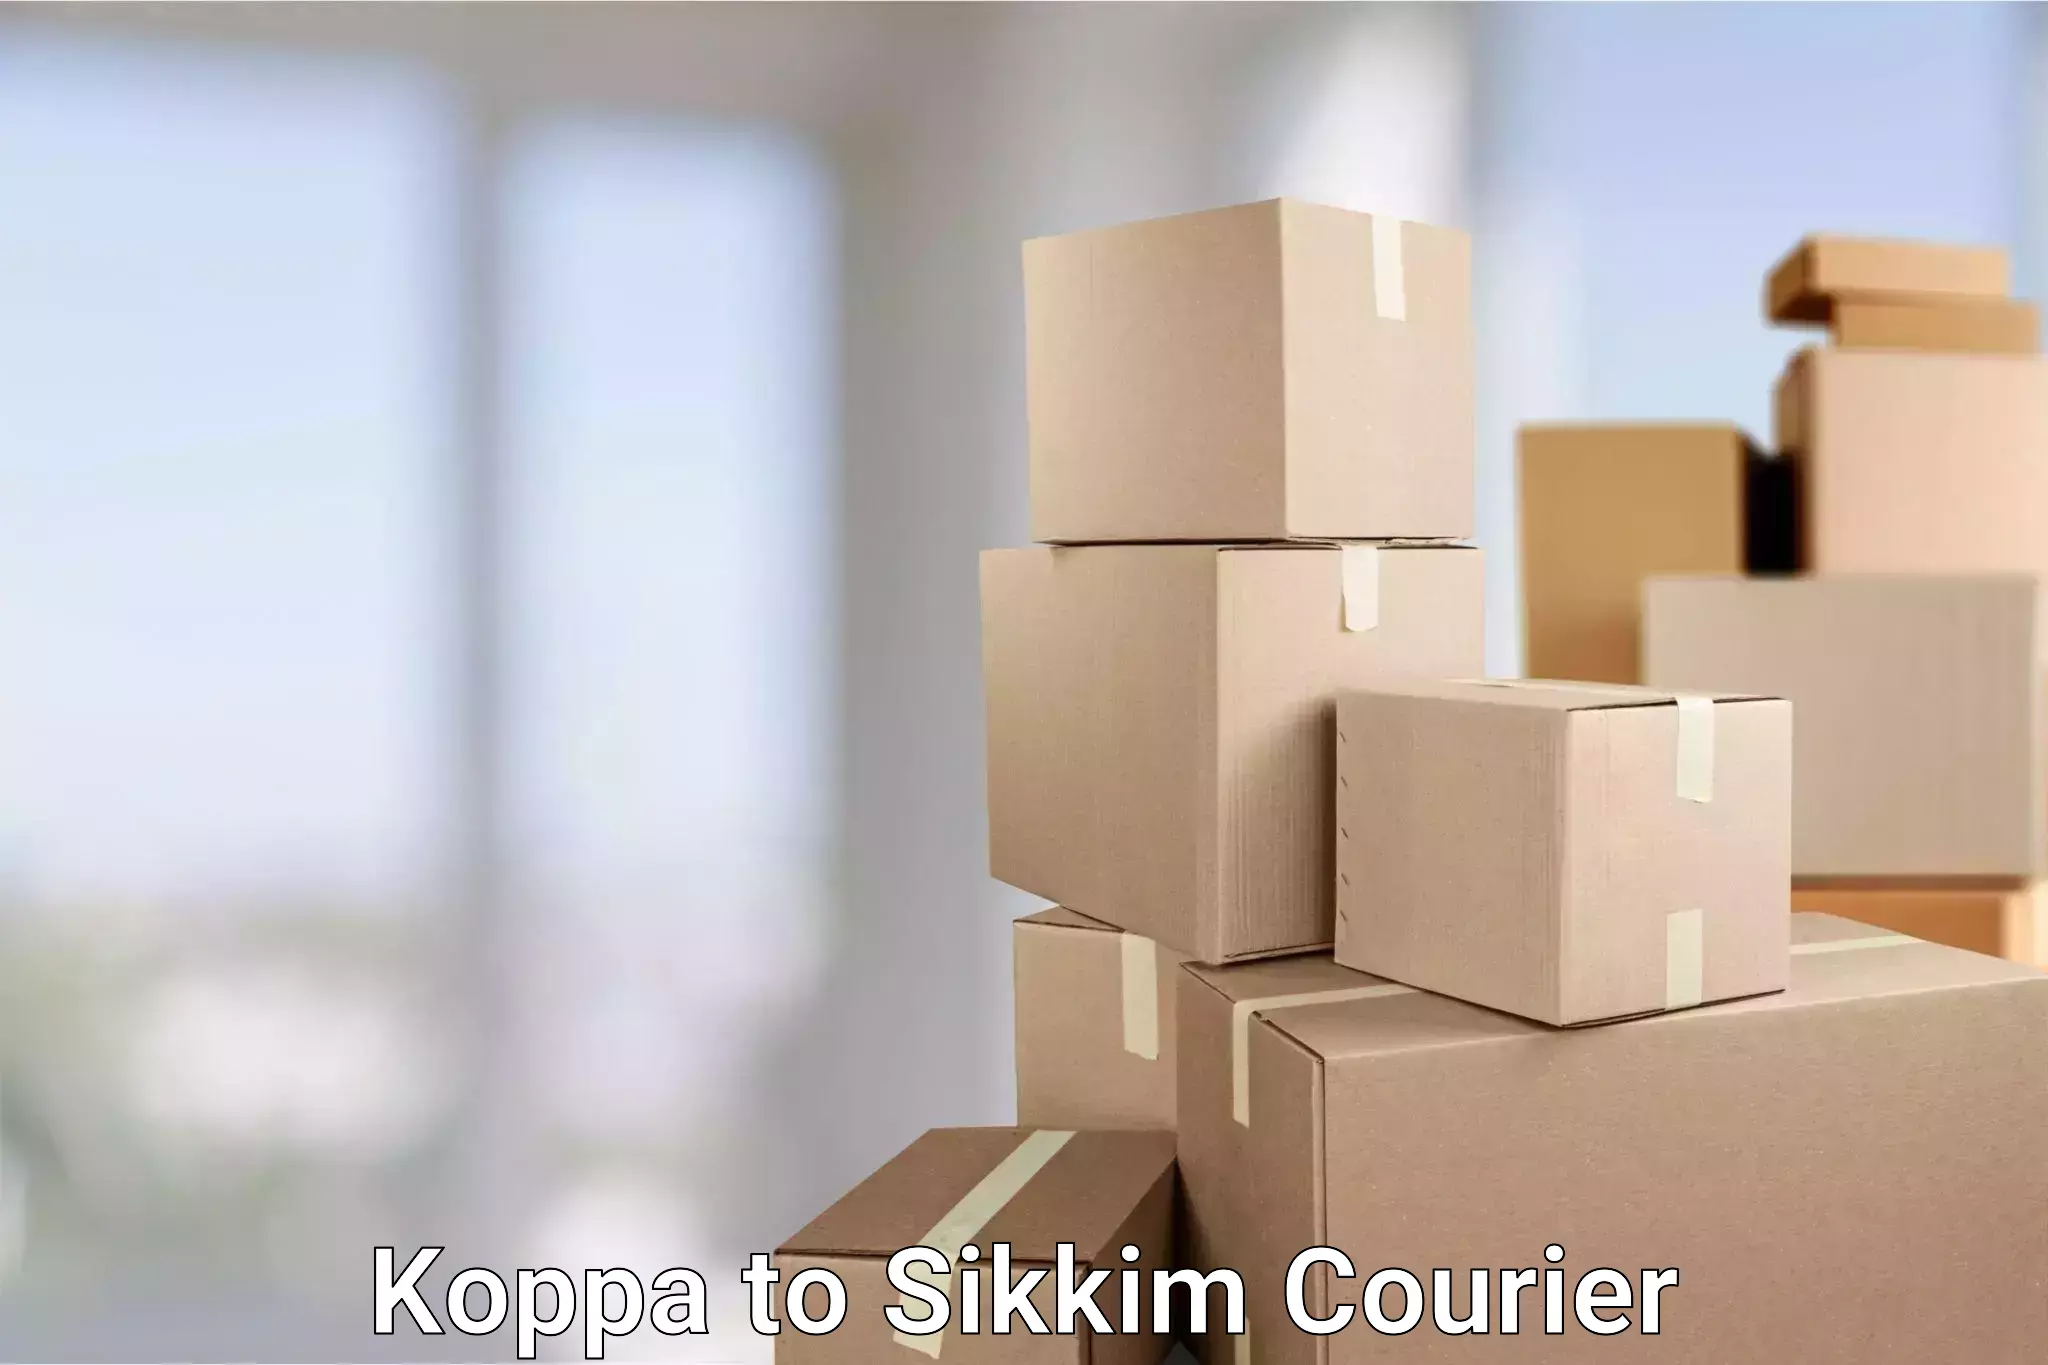 Courier service partnerships Koppa to Sikkim